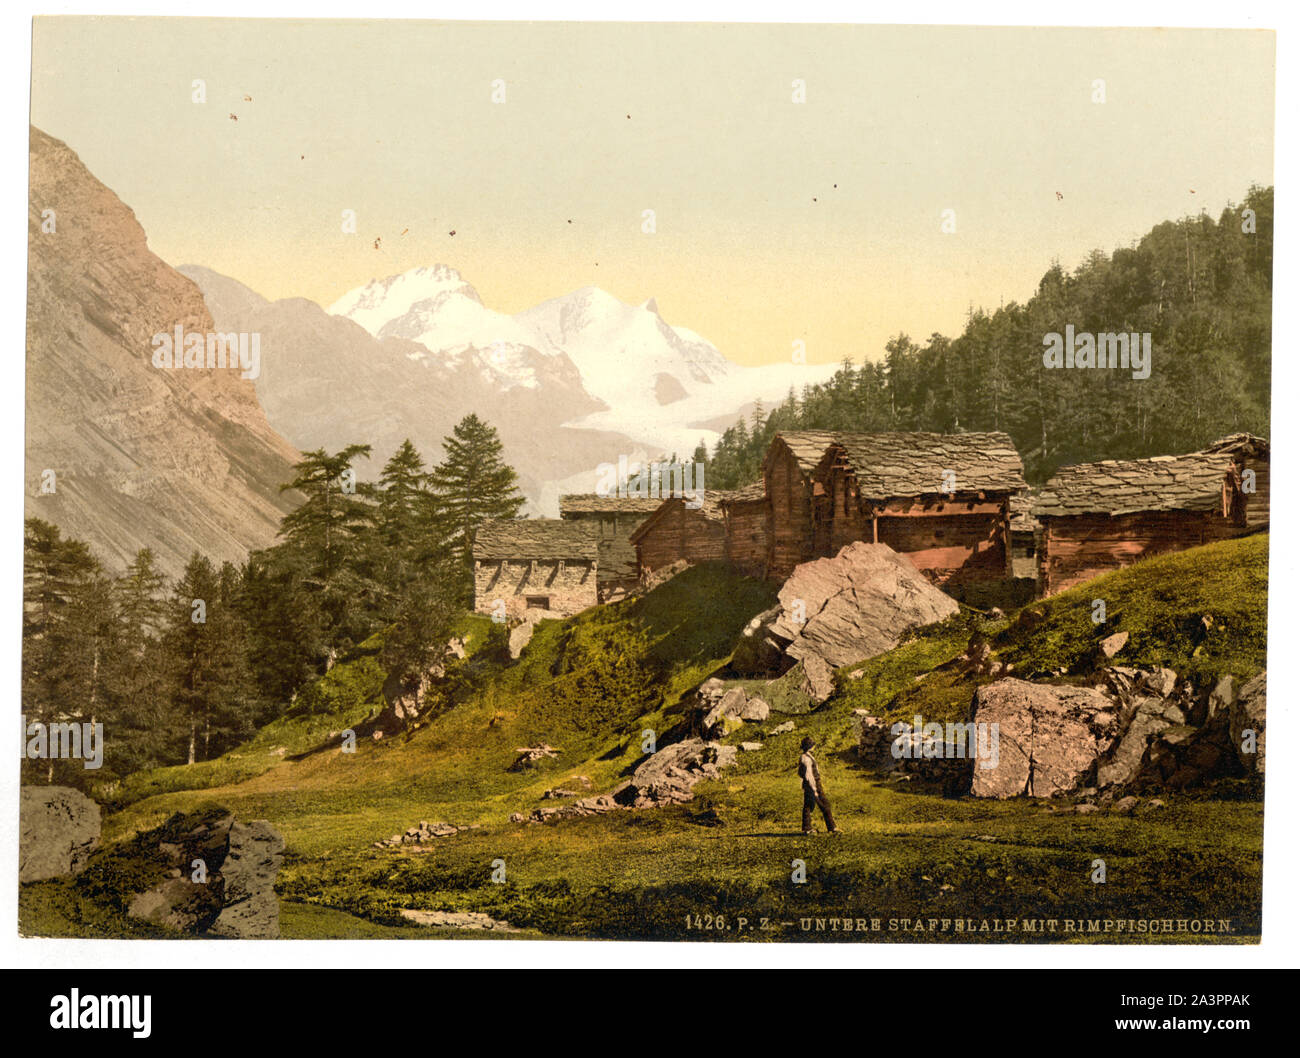 Staffel Alp and Rimpfischhorn, with chalets, Valais, Alps of, Switzerland Forms part of: Views of Switzerland in the Photochrom print collection. Print no. 1426. Title devised by Library staff. Stock Photo